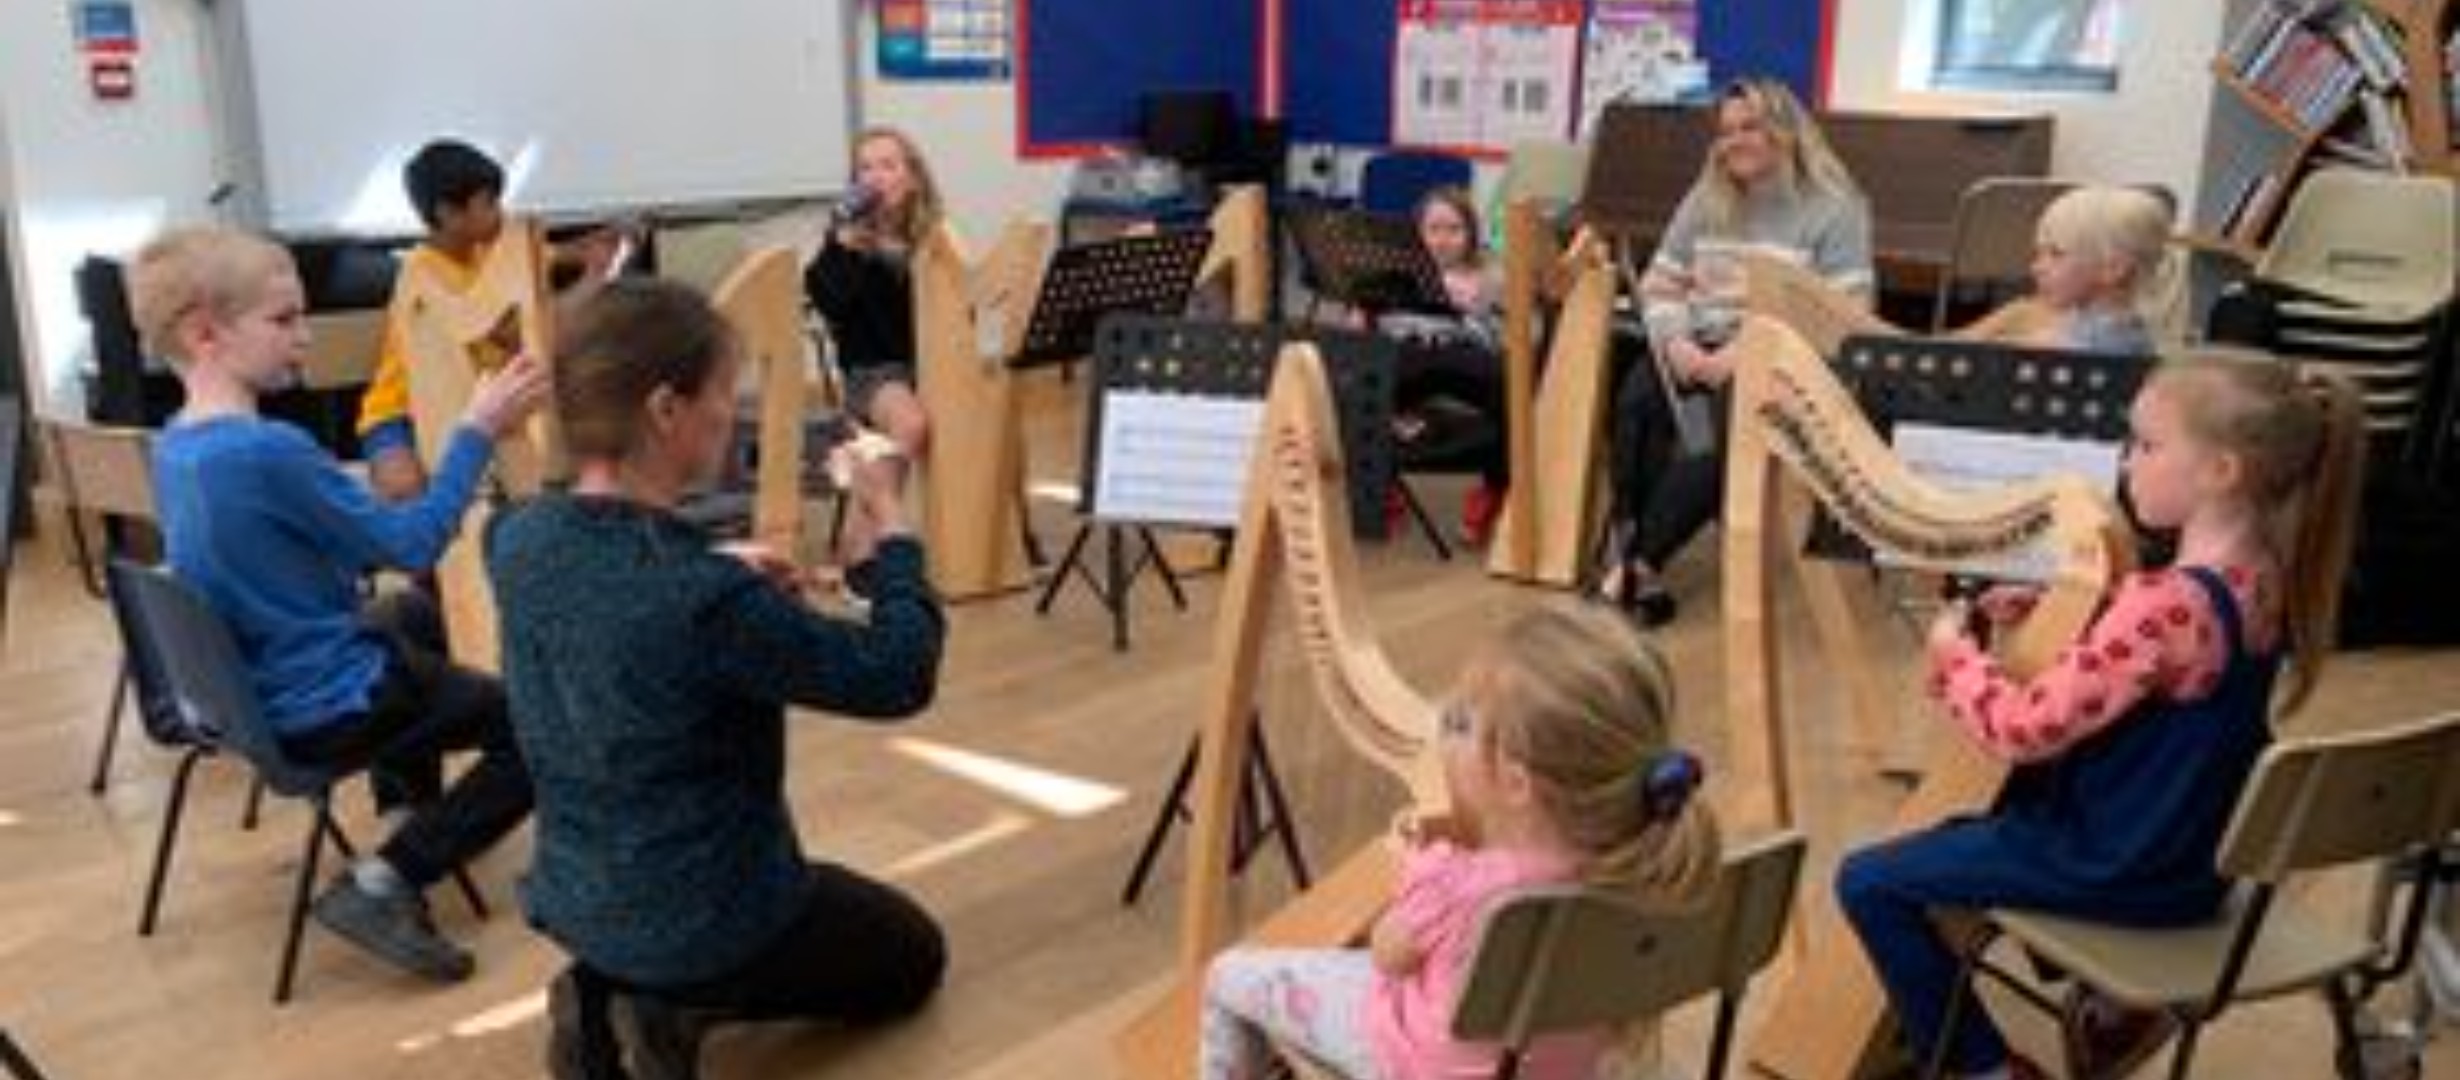 Morwenna teaching the harp to a group of children